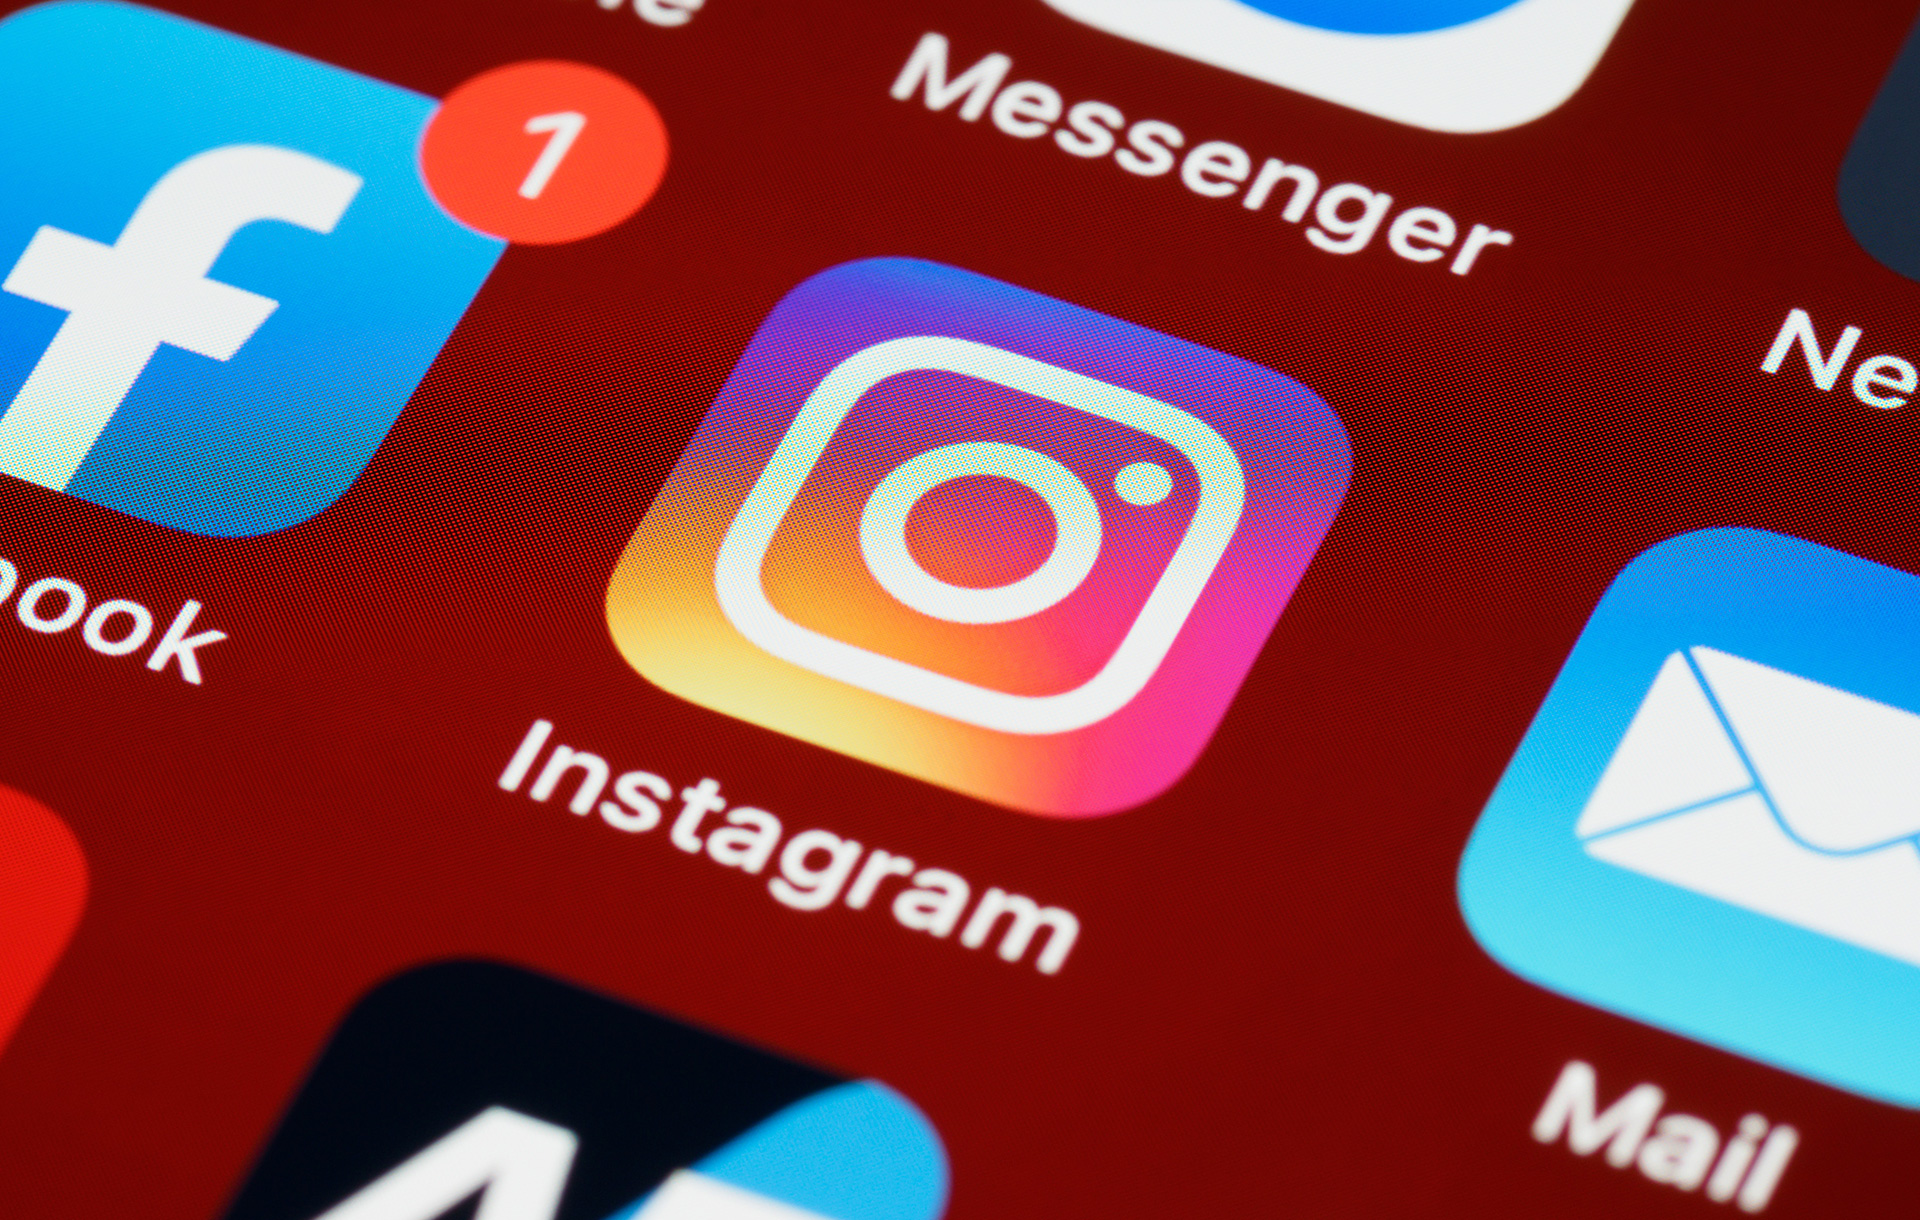 Are Instagram ads more valuable than Facebook ads